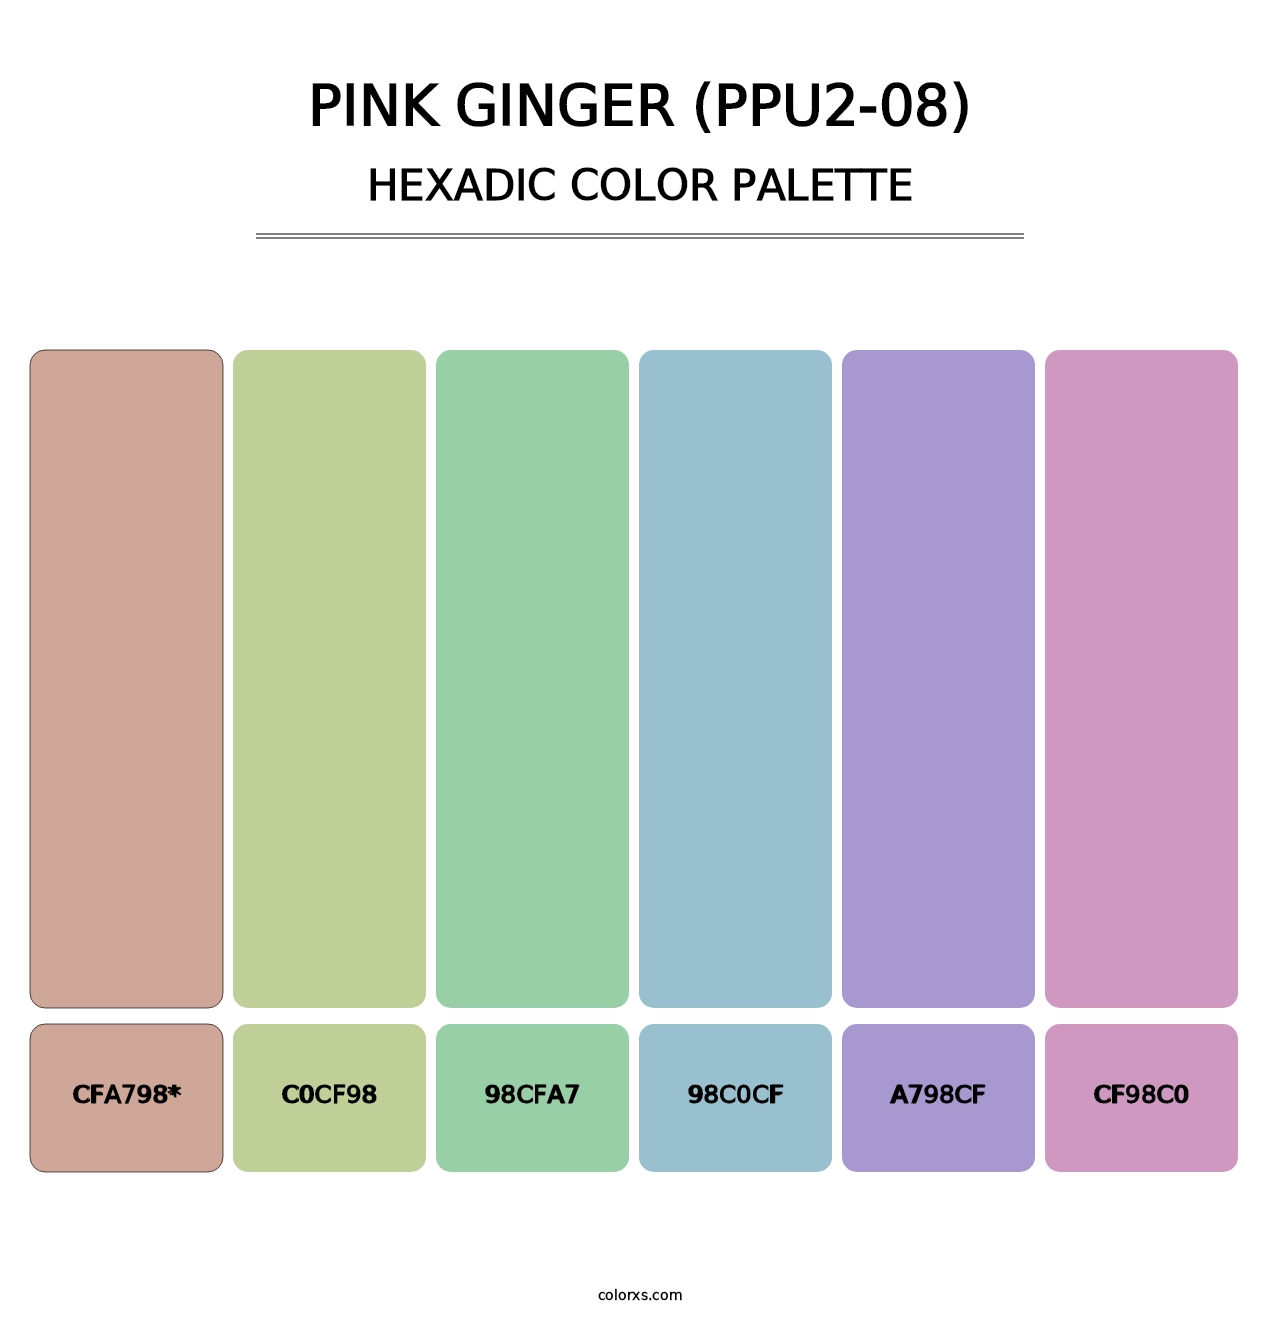 Pink Ginger (PPU2-08) - Hexadic Color Palette